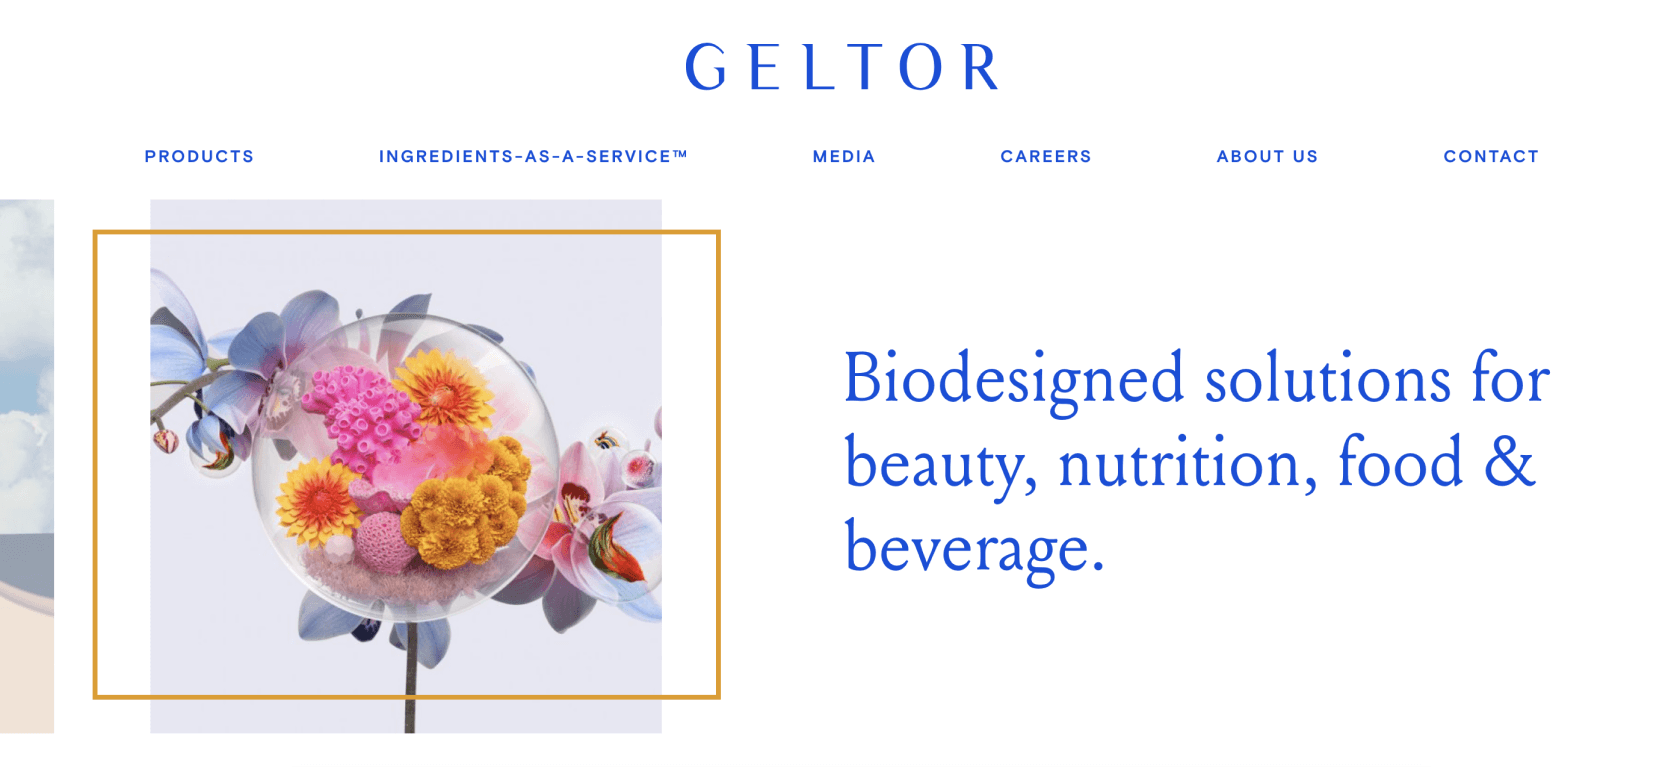 A page from Geltor showing Biodesigned solutions for beauty, nutrition, food and beverage